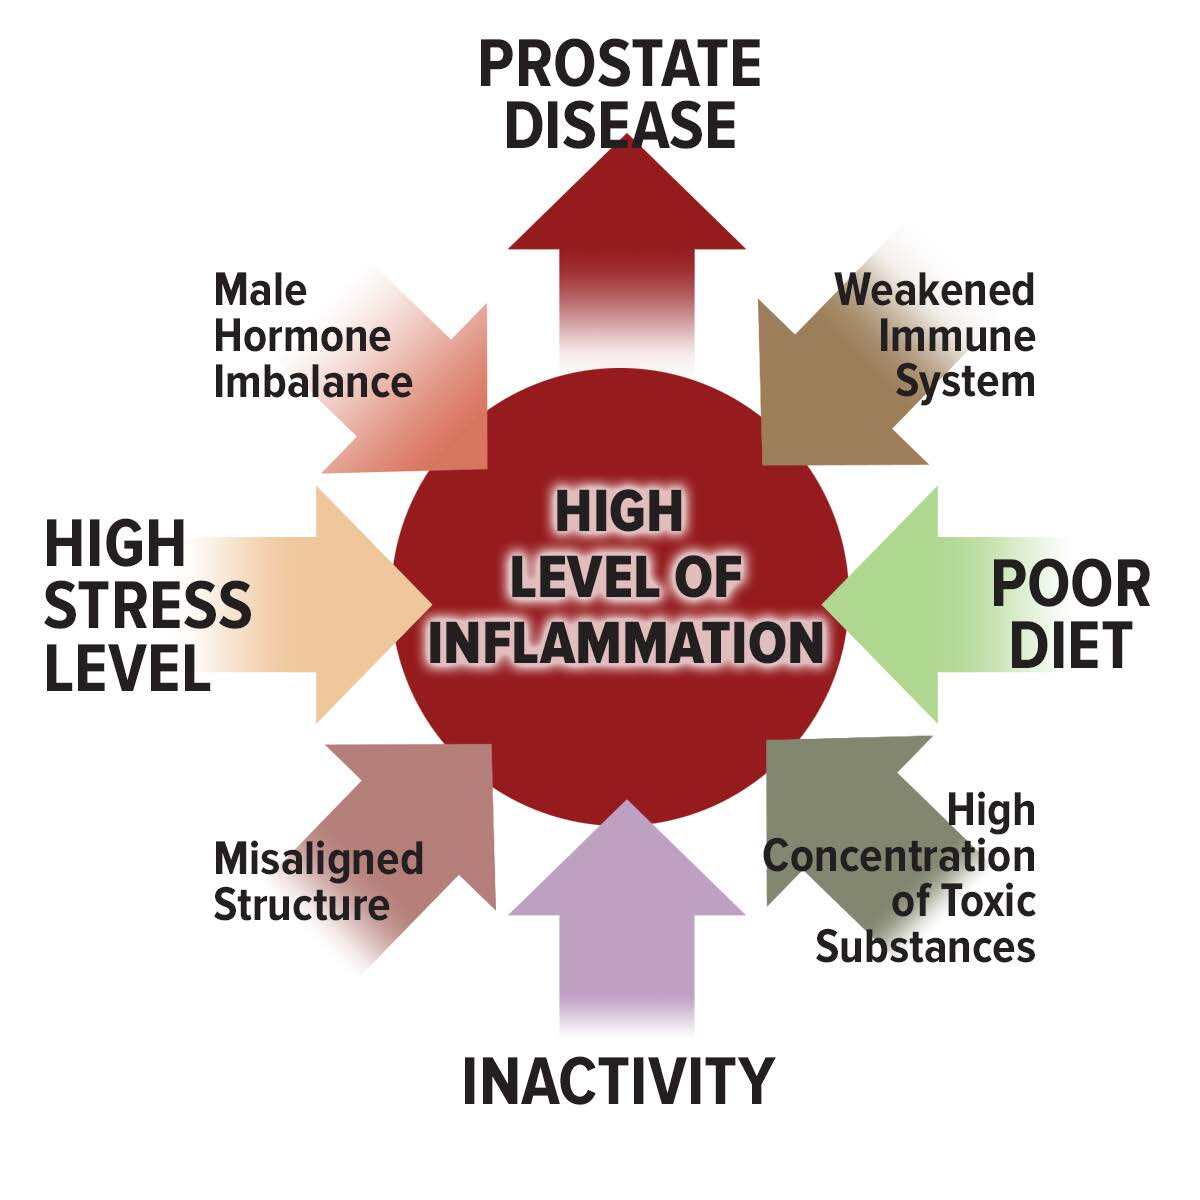 Causes of prostate disease